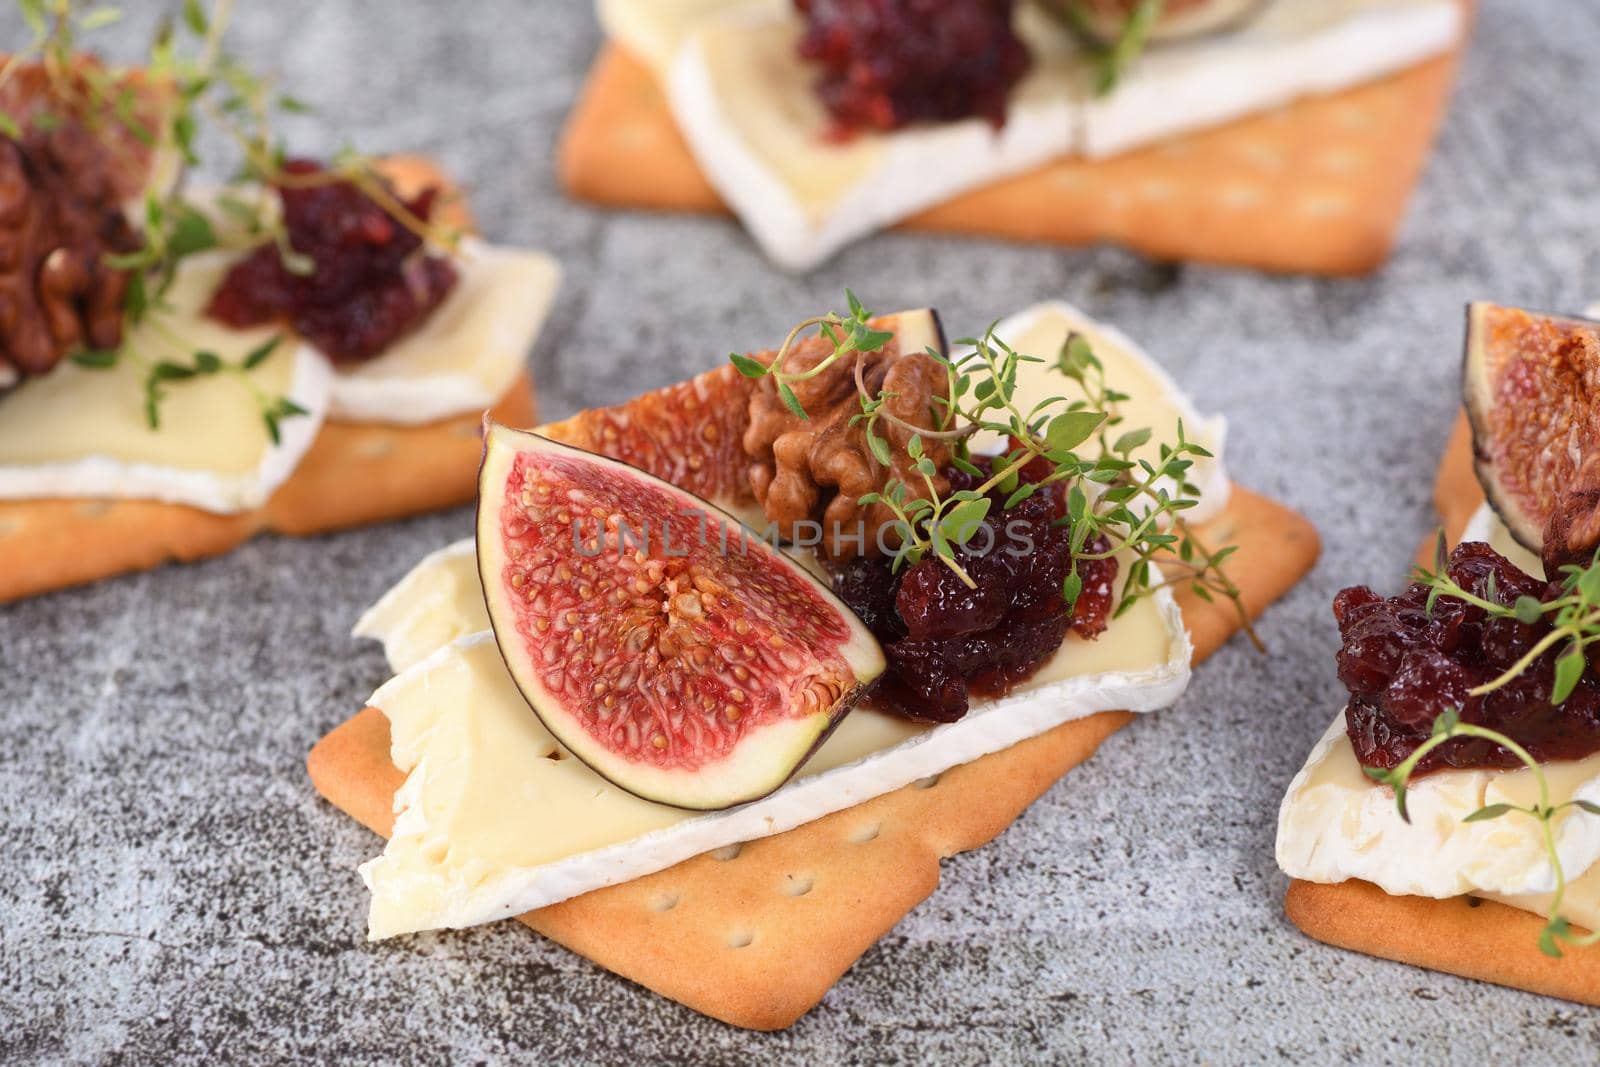 Cracker with a slice of camembert, jam, figs and nuts.
A great snack idea for a holiday, picnic or party.
